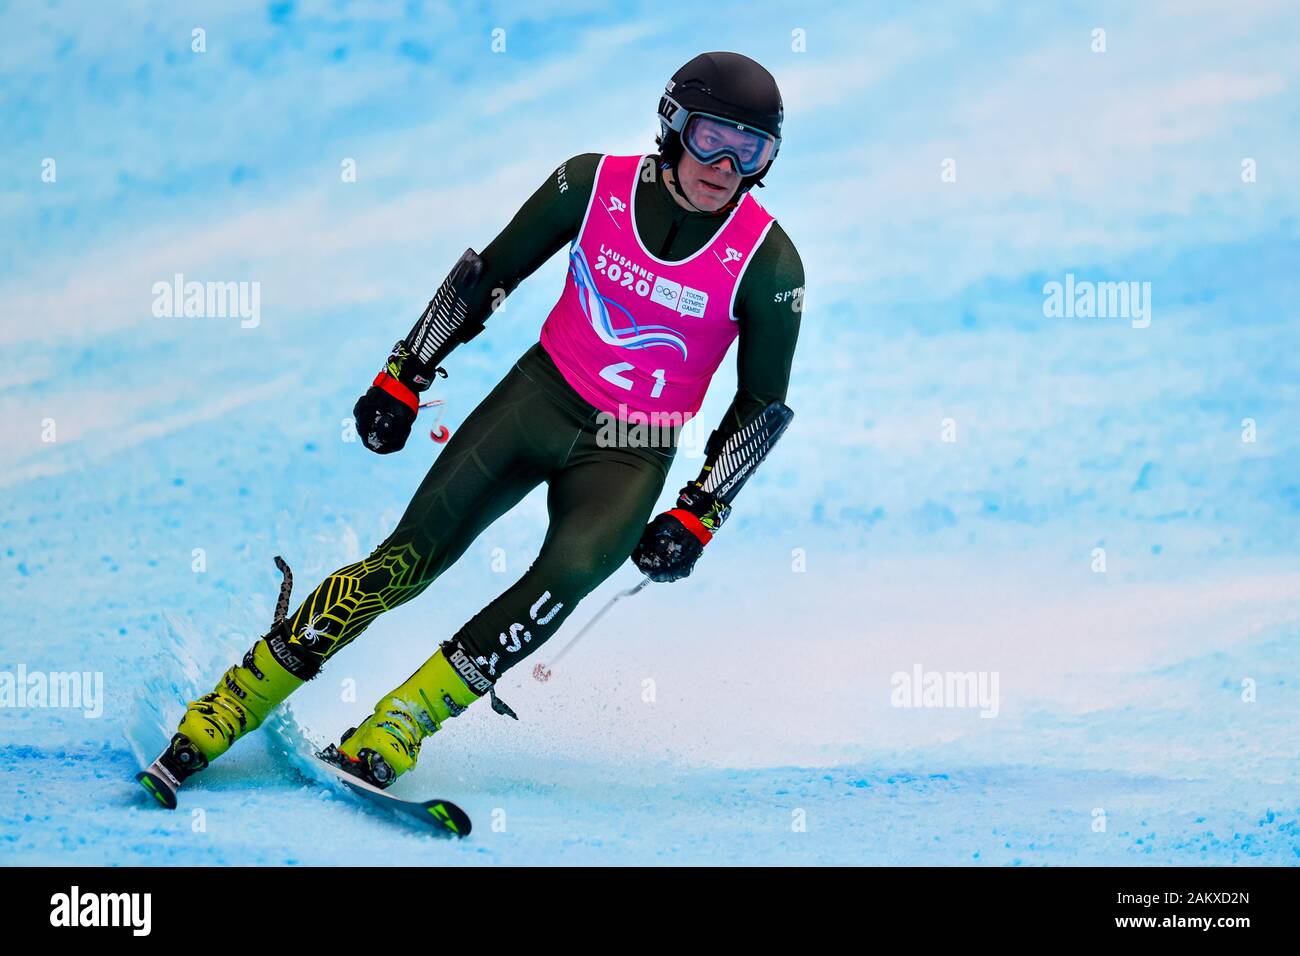 LAUSANNE, SWITZERLAND. 10th, Jan 2020. PENNINGTON Trent (USA) competes in Alpine Ski Mens Super G during the Lausanne 2020 Youth Olympic Games at Les Diablerets Alpine Centre on Friday, 10 January 2020. LAUSANNE, SWITZERLAND. Credit: Taka G Wu/Alamy Live News Stock Photo